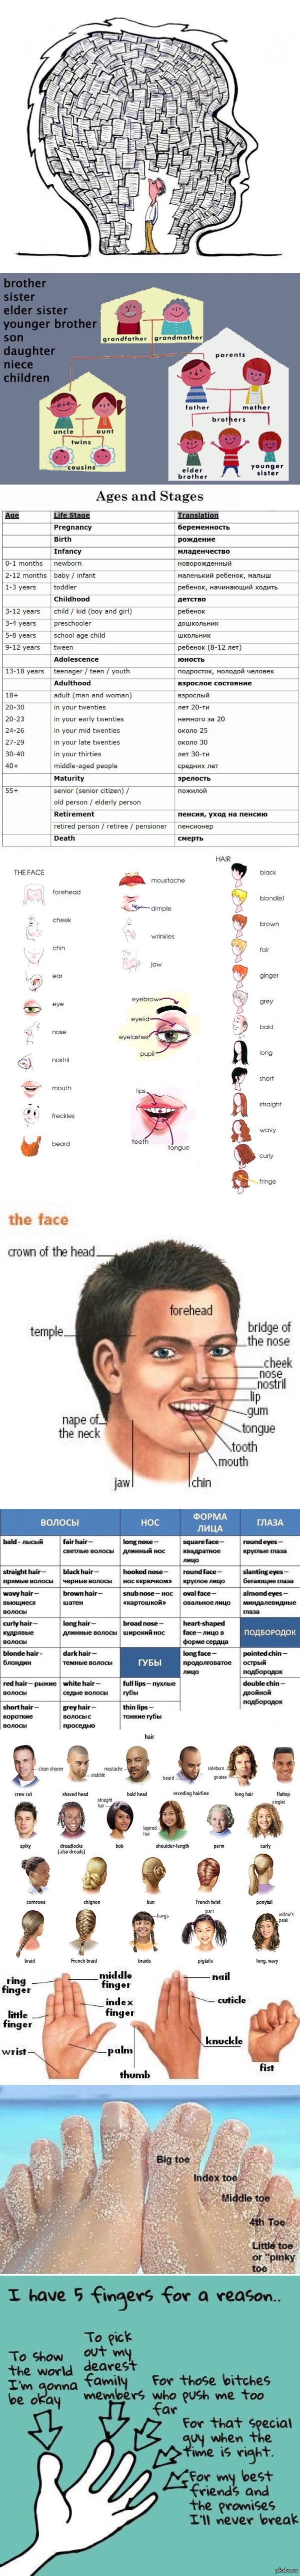 Human ( ) appearance( ), family tree( / ), age and stages(   ), parts of body(  )